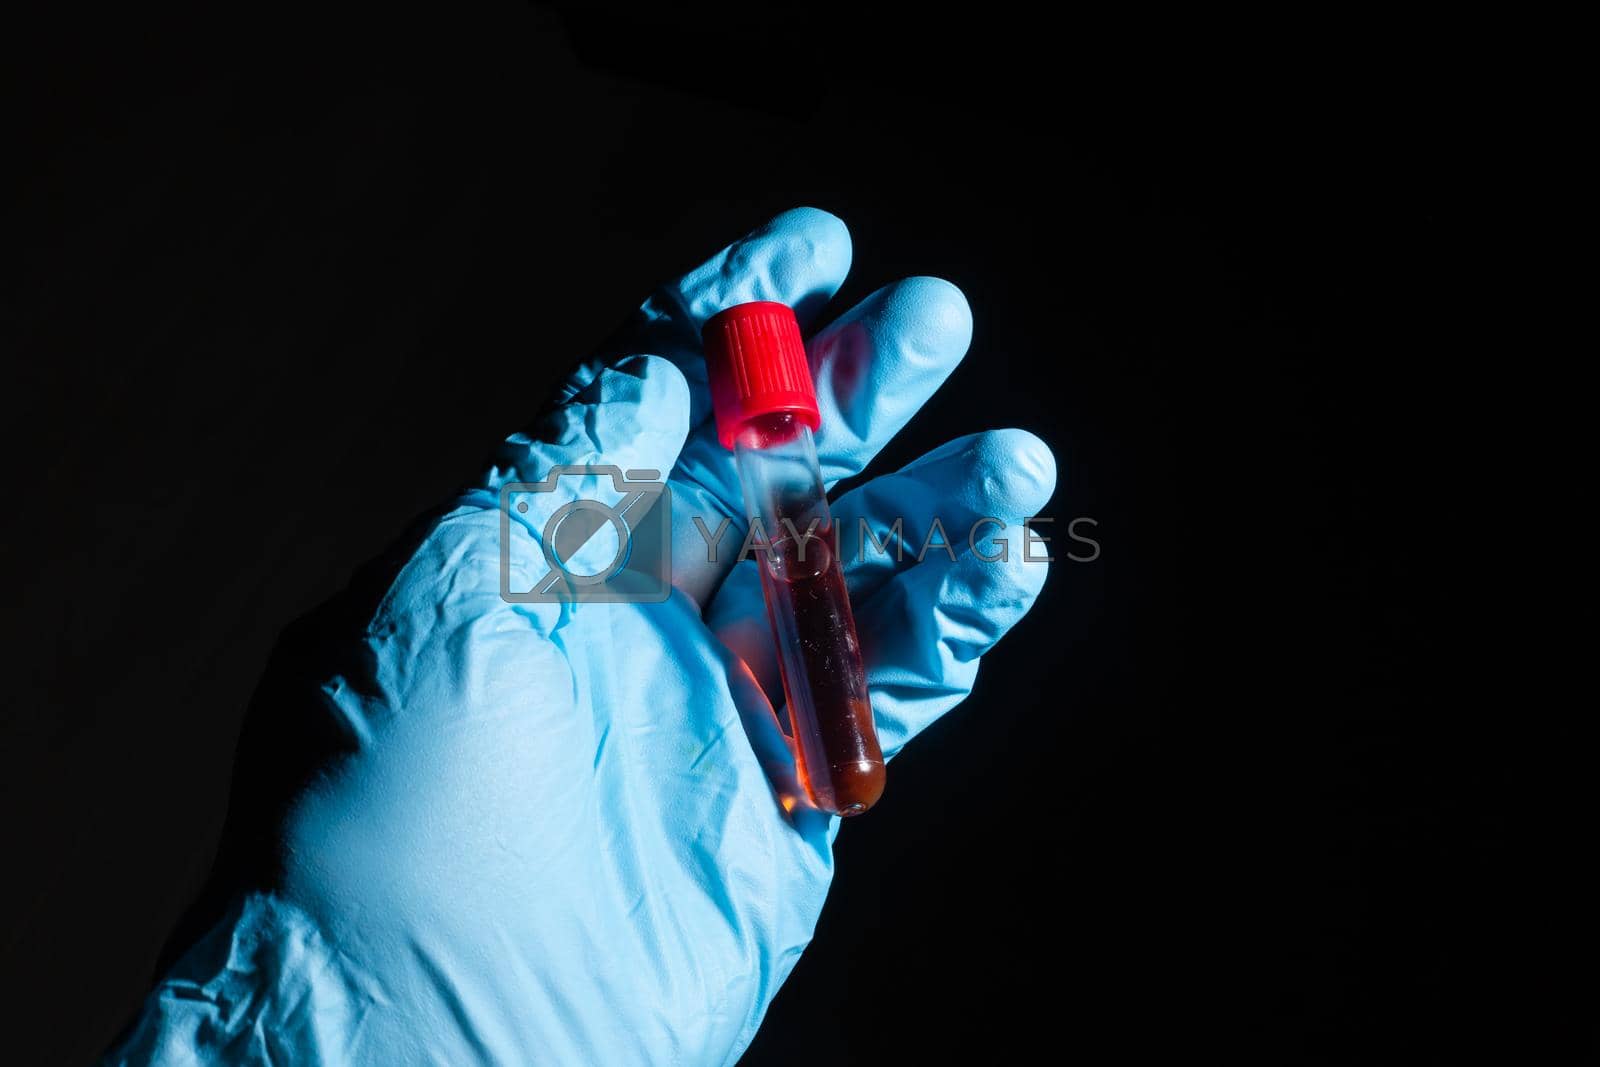 Royalty free image of Medical doctor or laborant holding tube with nCoV Coronavirus vaccine for 2019-nCoV COVID virus. Novel Coronavirus originating in Wuhan, China. Coronavirus 2019-nCoV COVID concept. by Andelov13